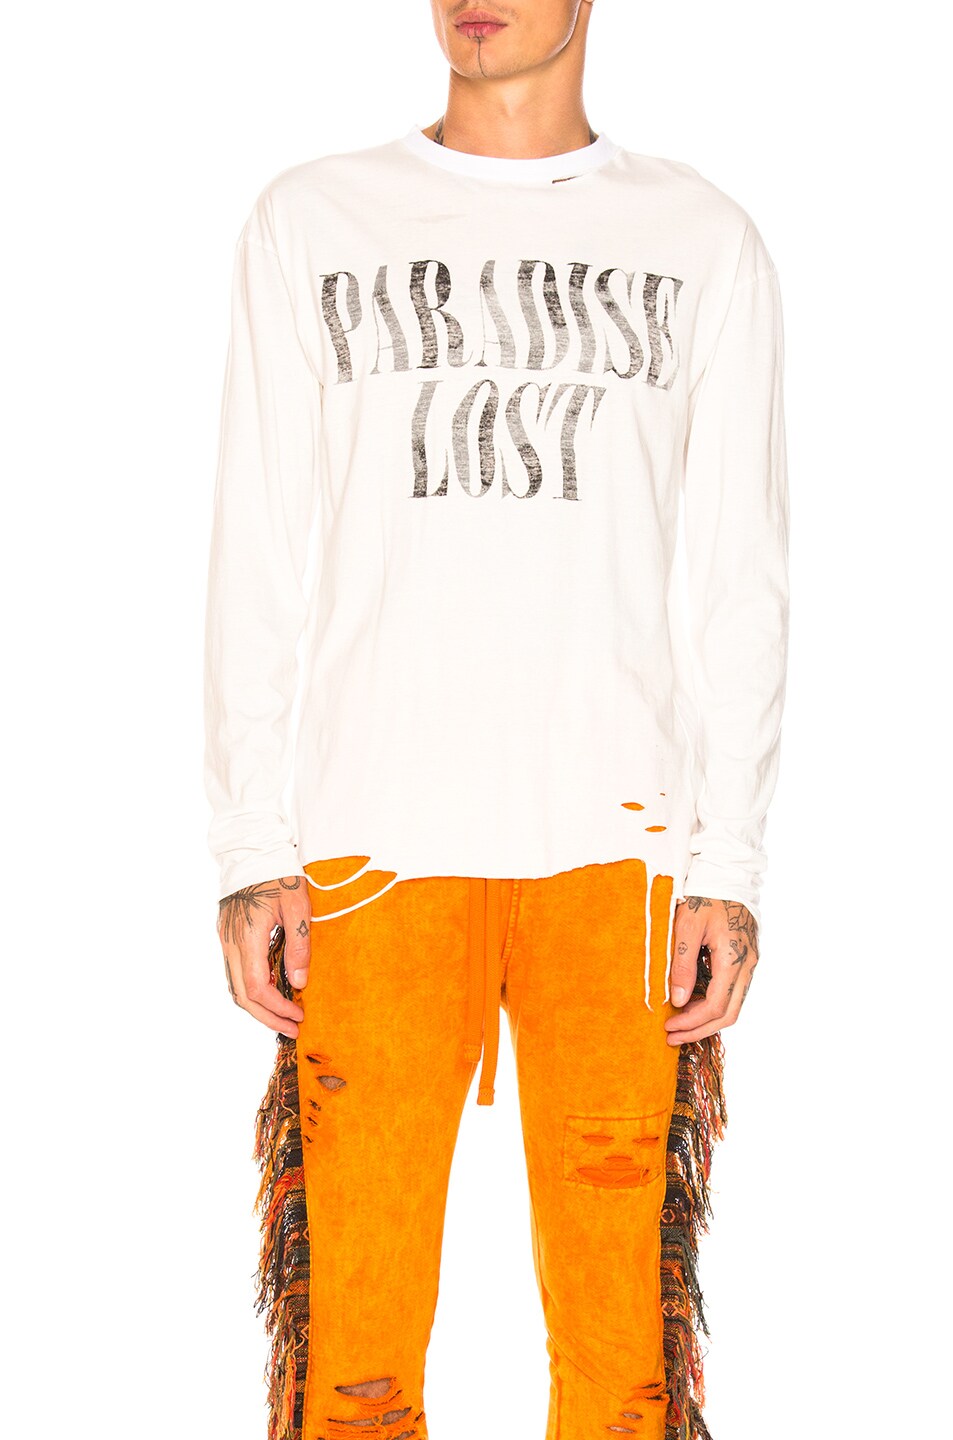 Image 1 of Alchemist Paradise Lost Long Sleeve Tee in White